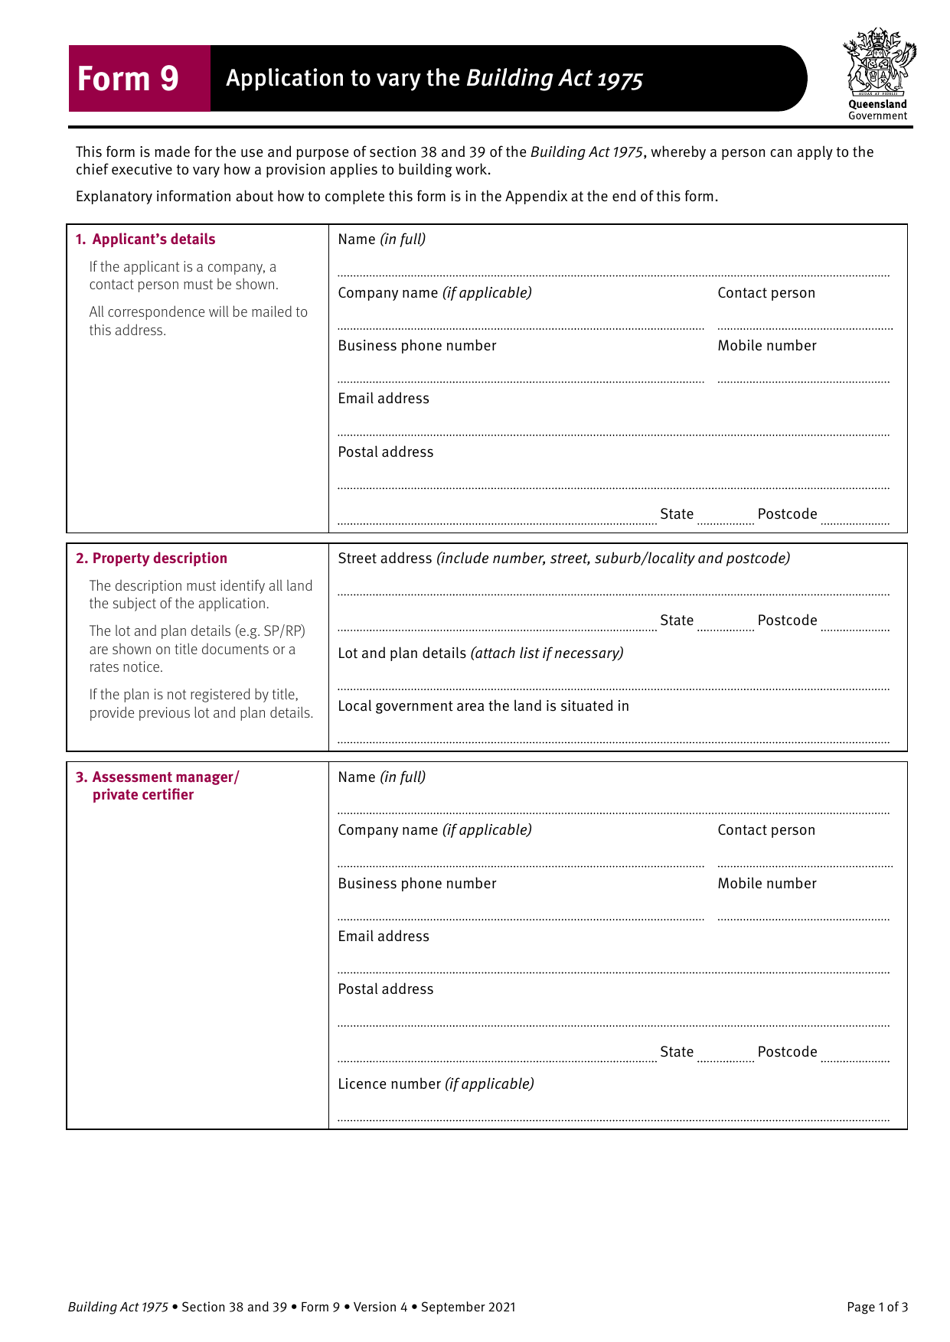 Form 9 Application to Vary the Building Act 1975 - Queensland, Australia, Page 1